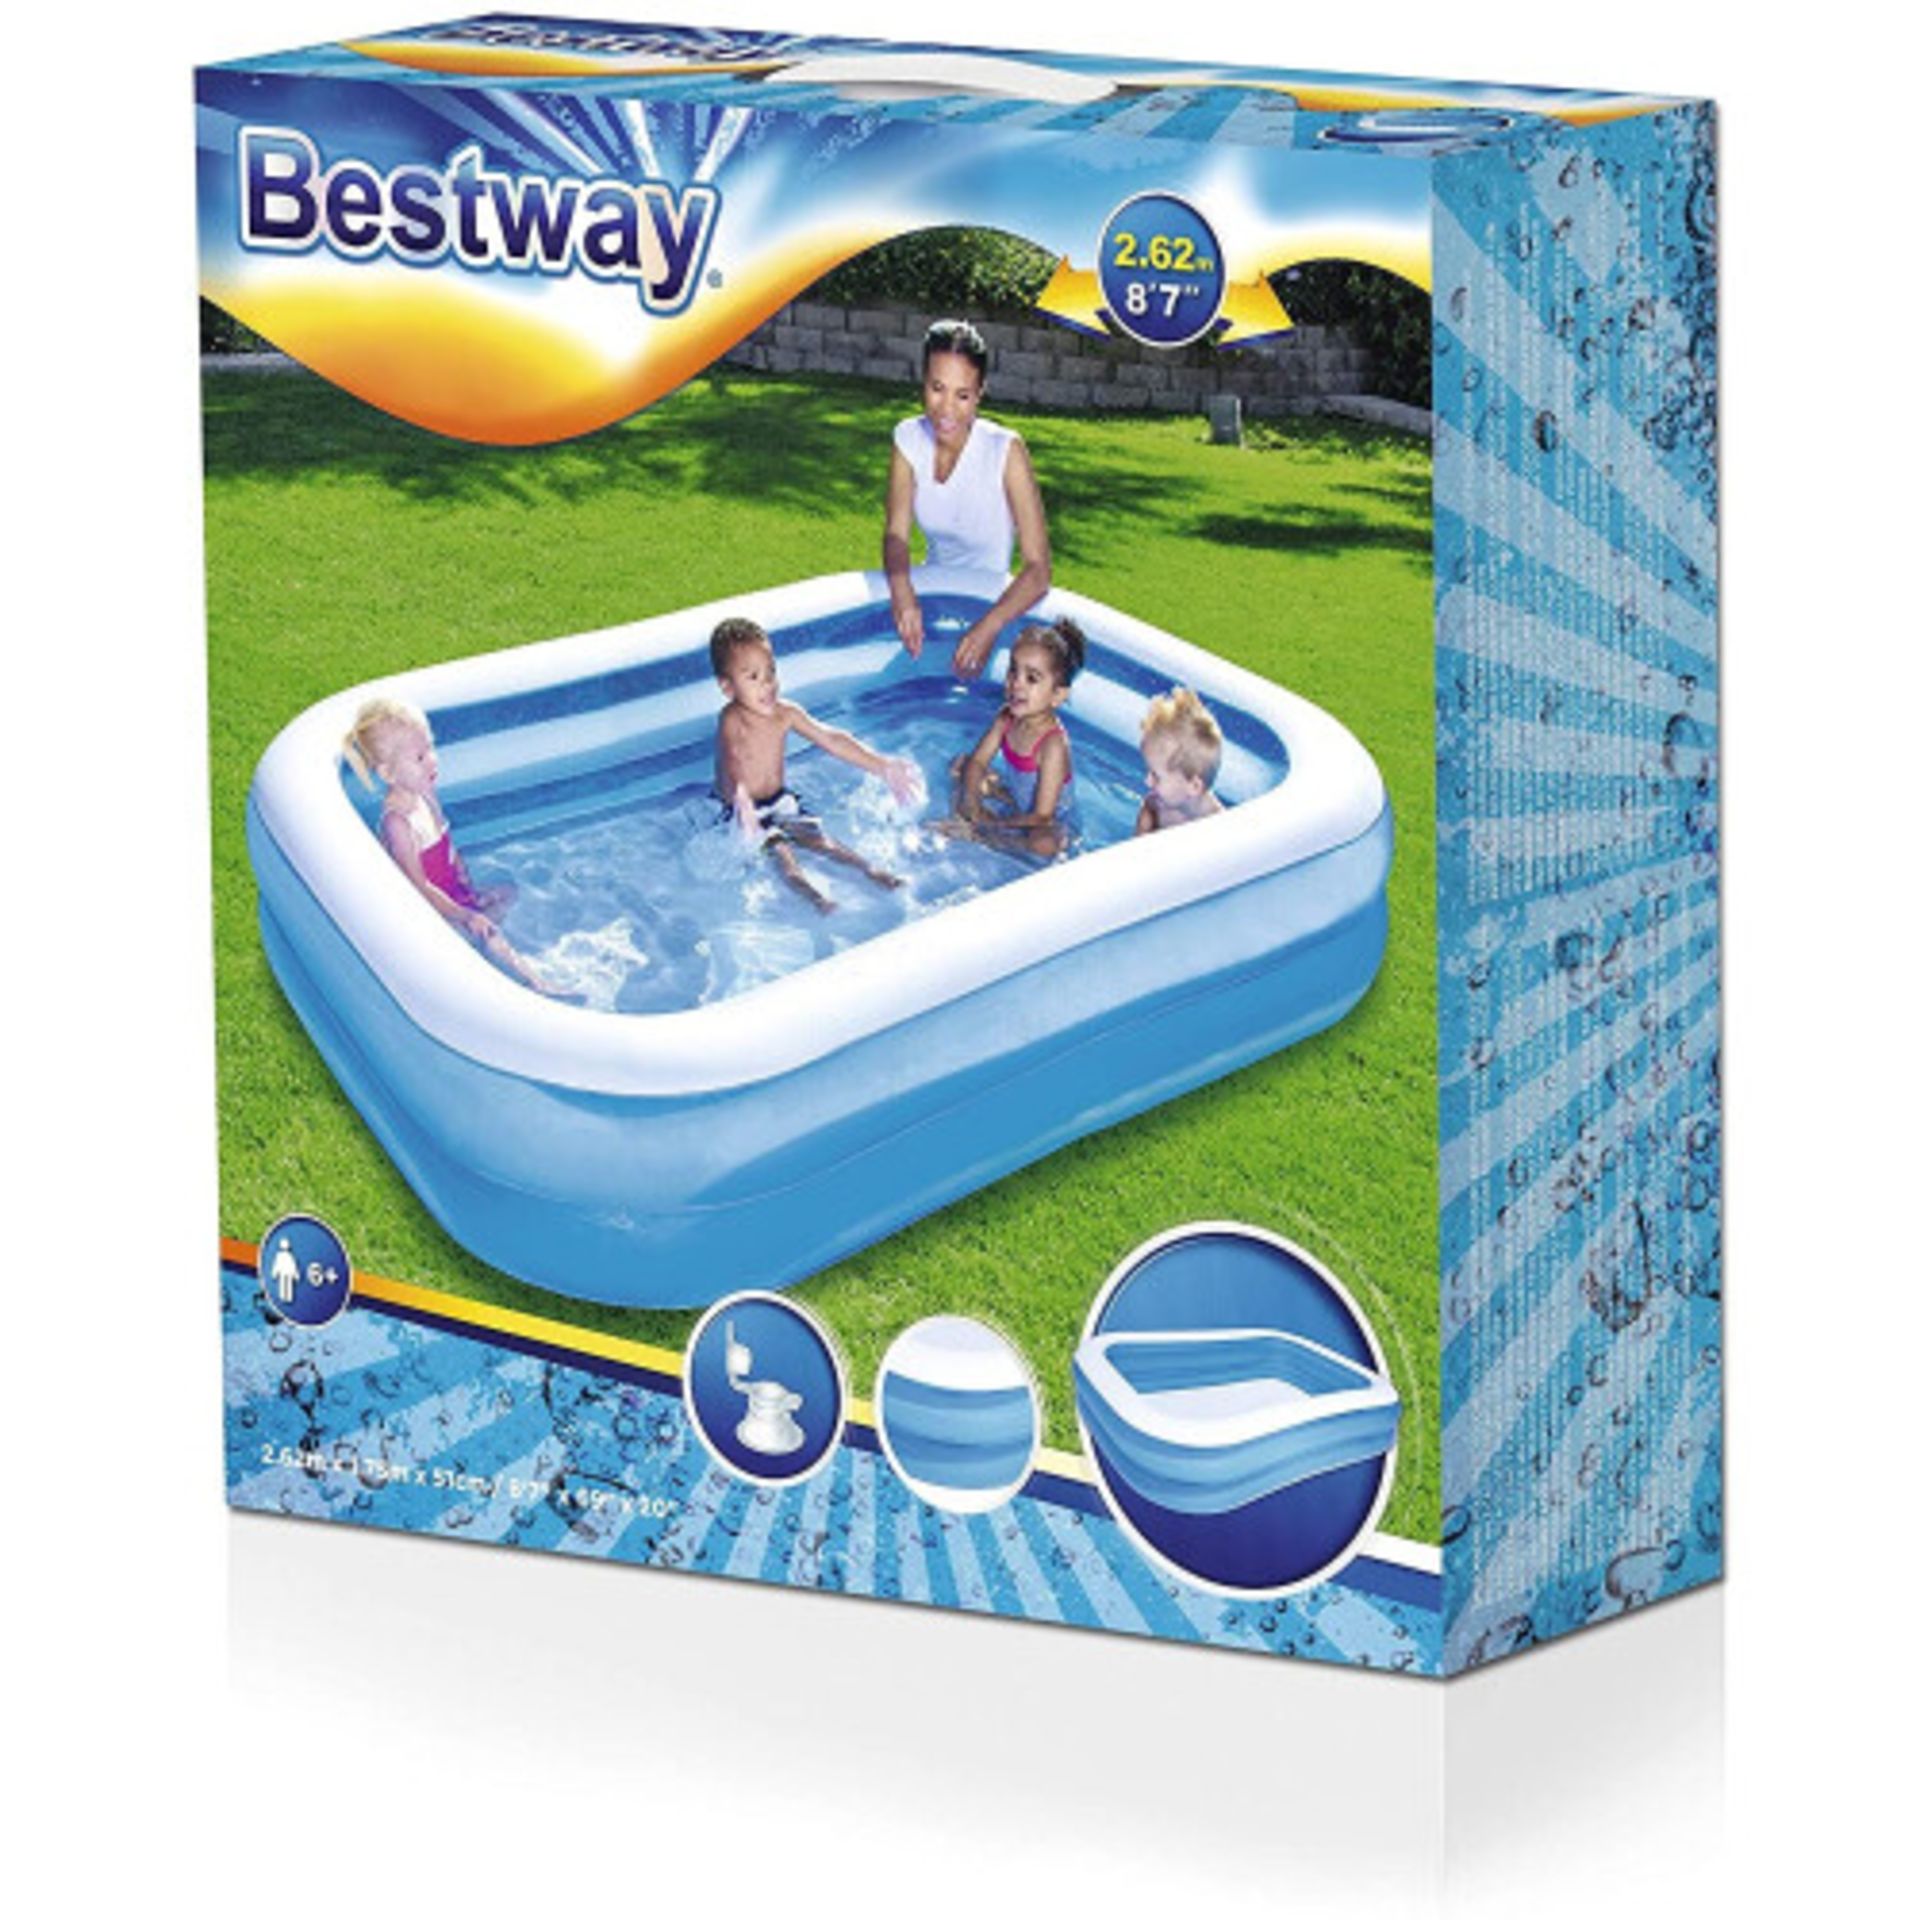 6 X BRAND NEW BESTWAY SPLASH AND PLAY LARGE FAMILY INFLATABLE SWIMMING POOL (2.62 M X 1.75 M X 51 CM